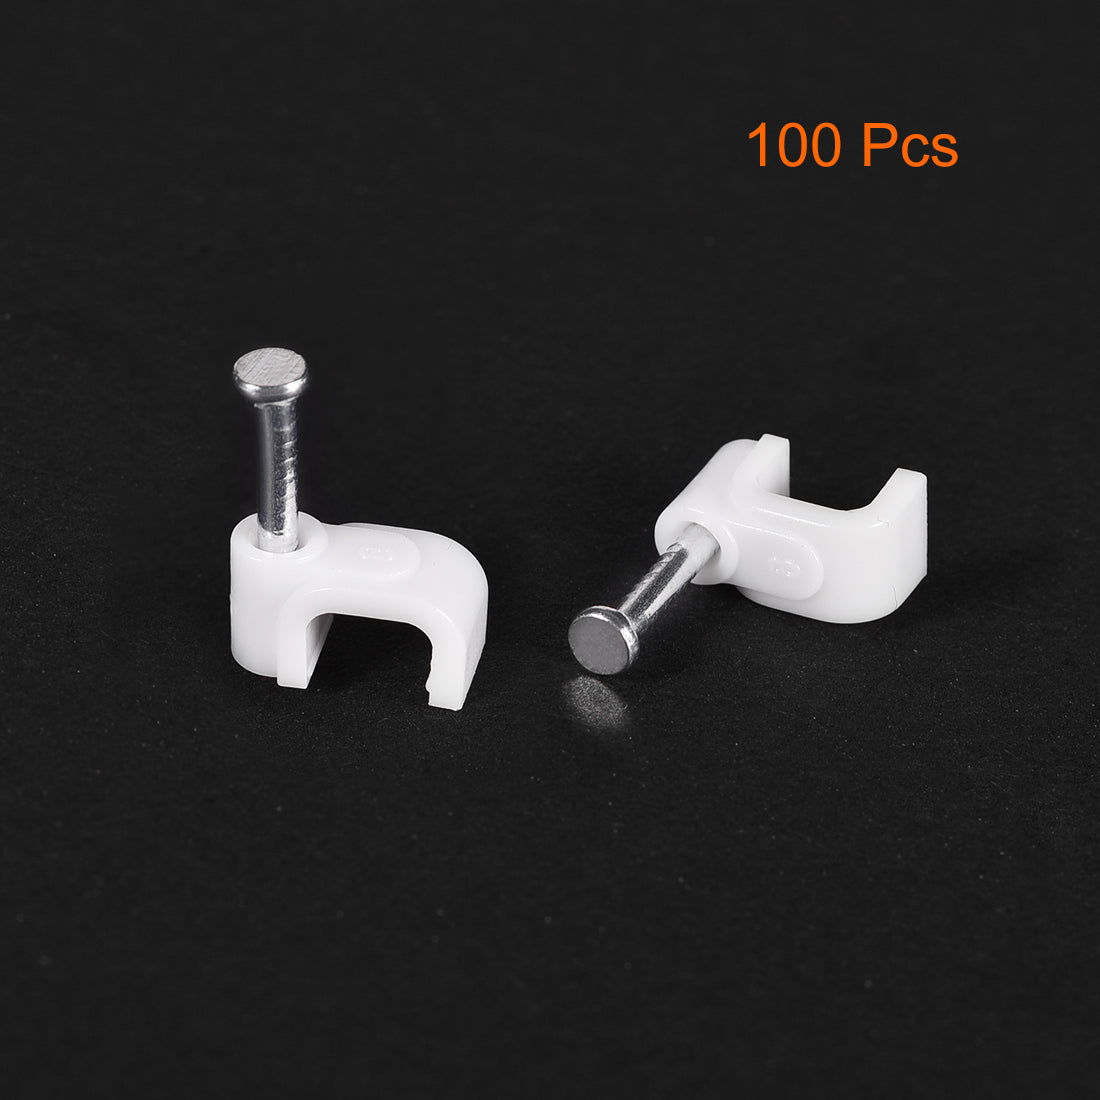 uxcell Uxcell Nail Cable Clips 6mm Clamps Wire Holder Square Fastener for Home Office Cords Management White 100Pcs